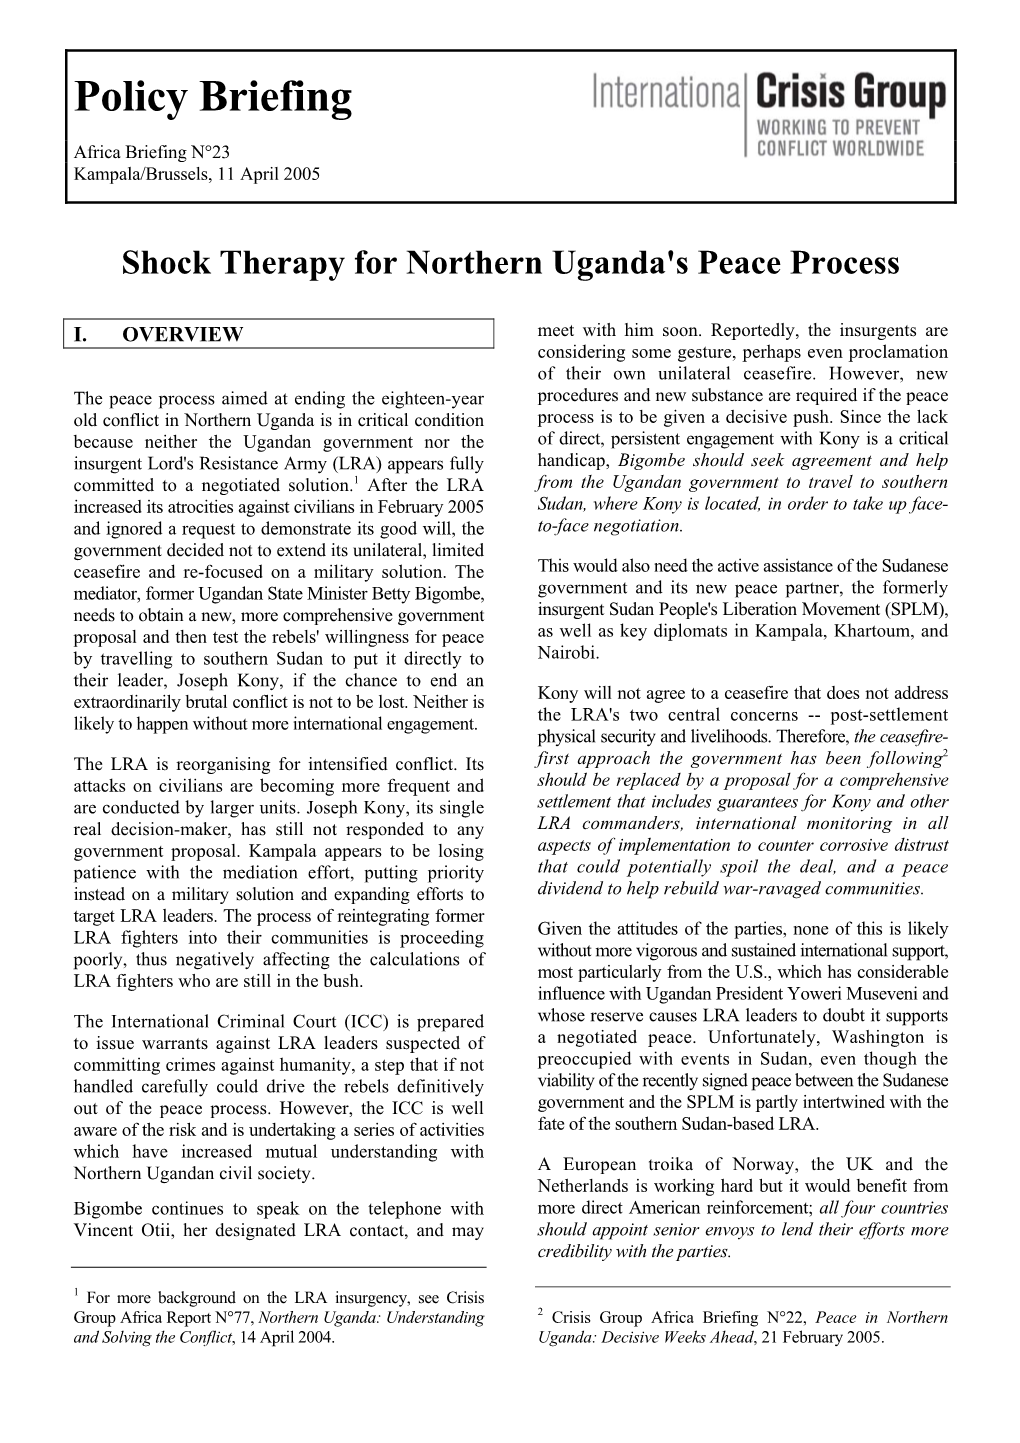 Opportunity for Peace in Northern Uganda